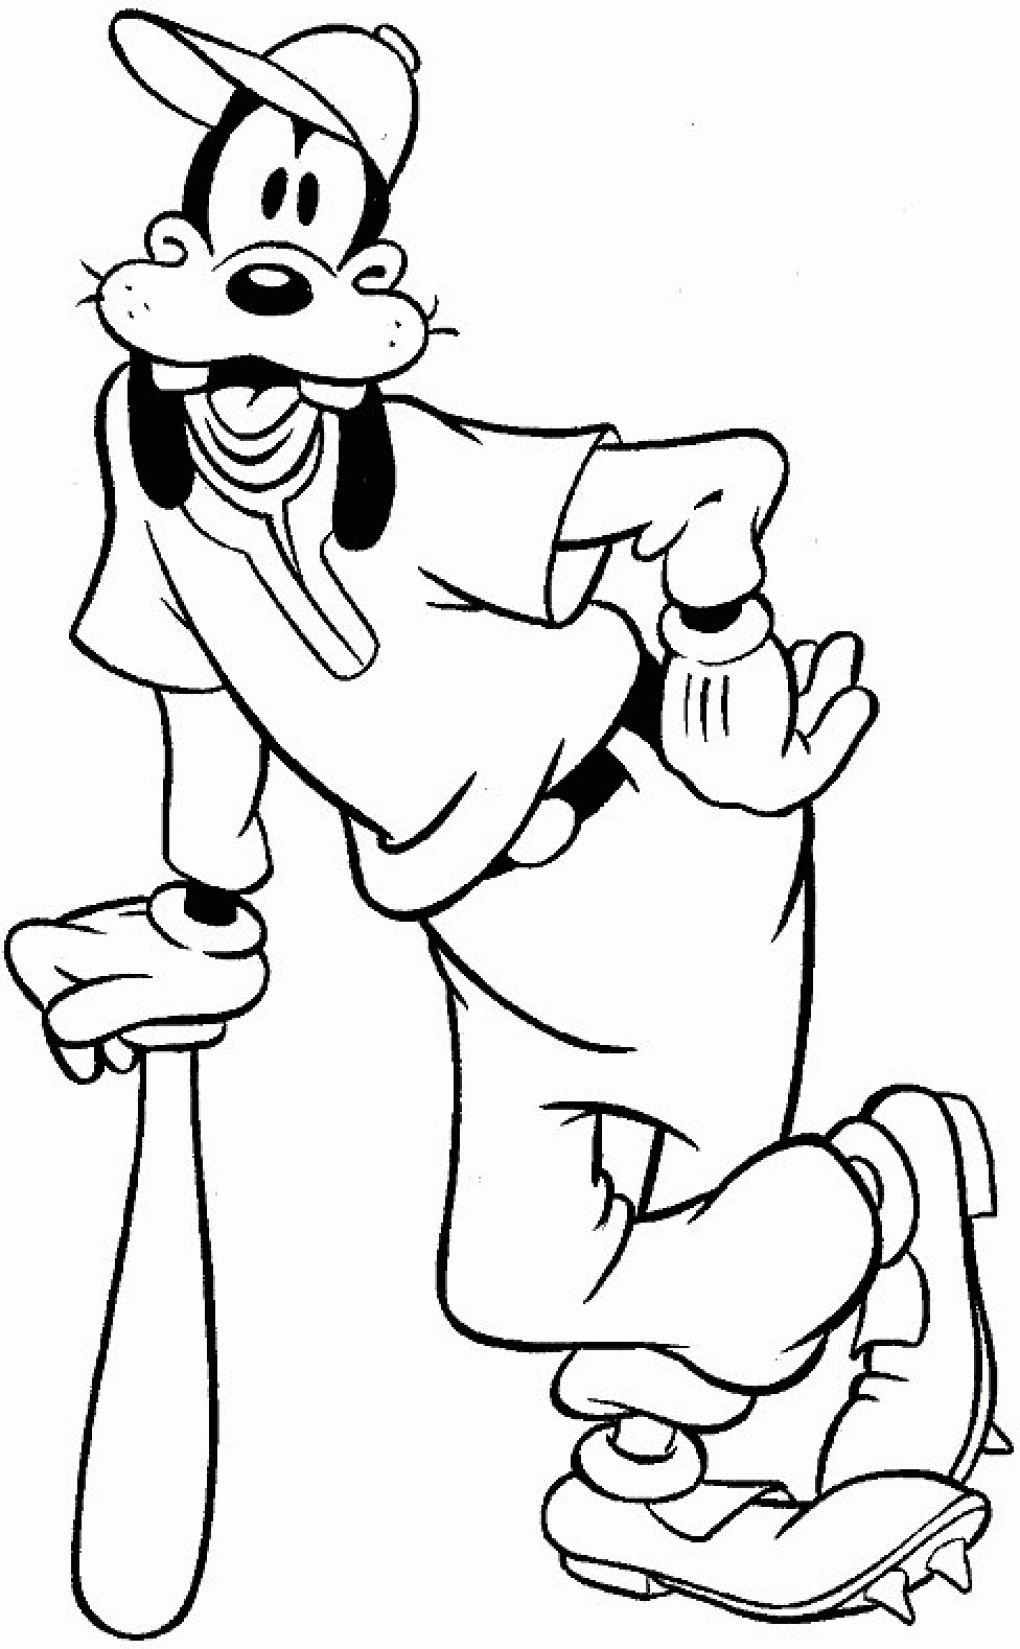 disney-goofy-coloring-pages